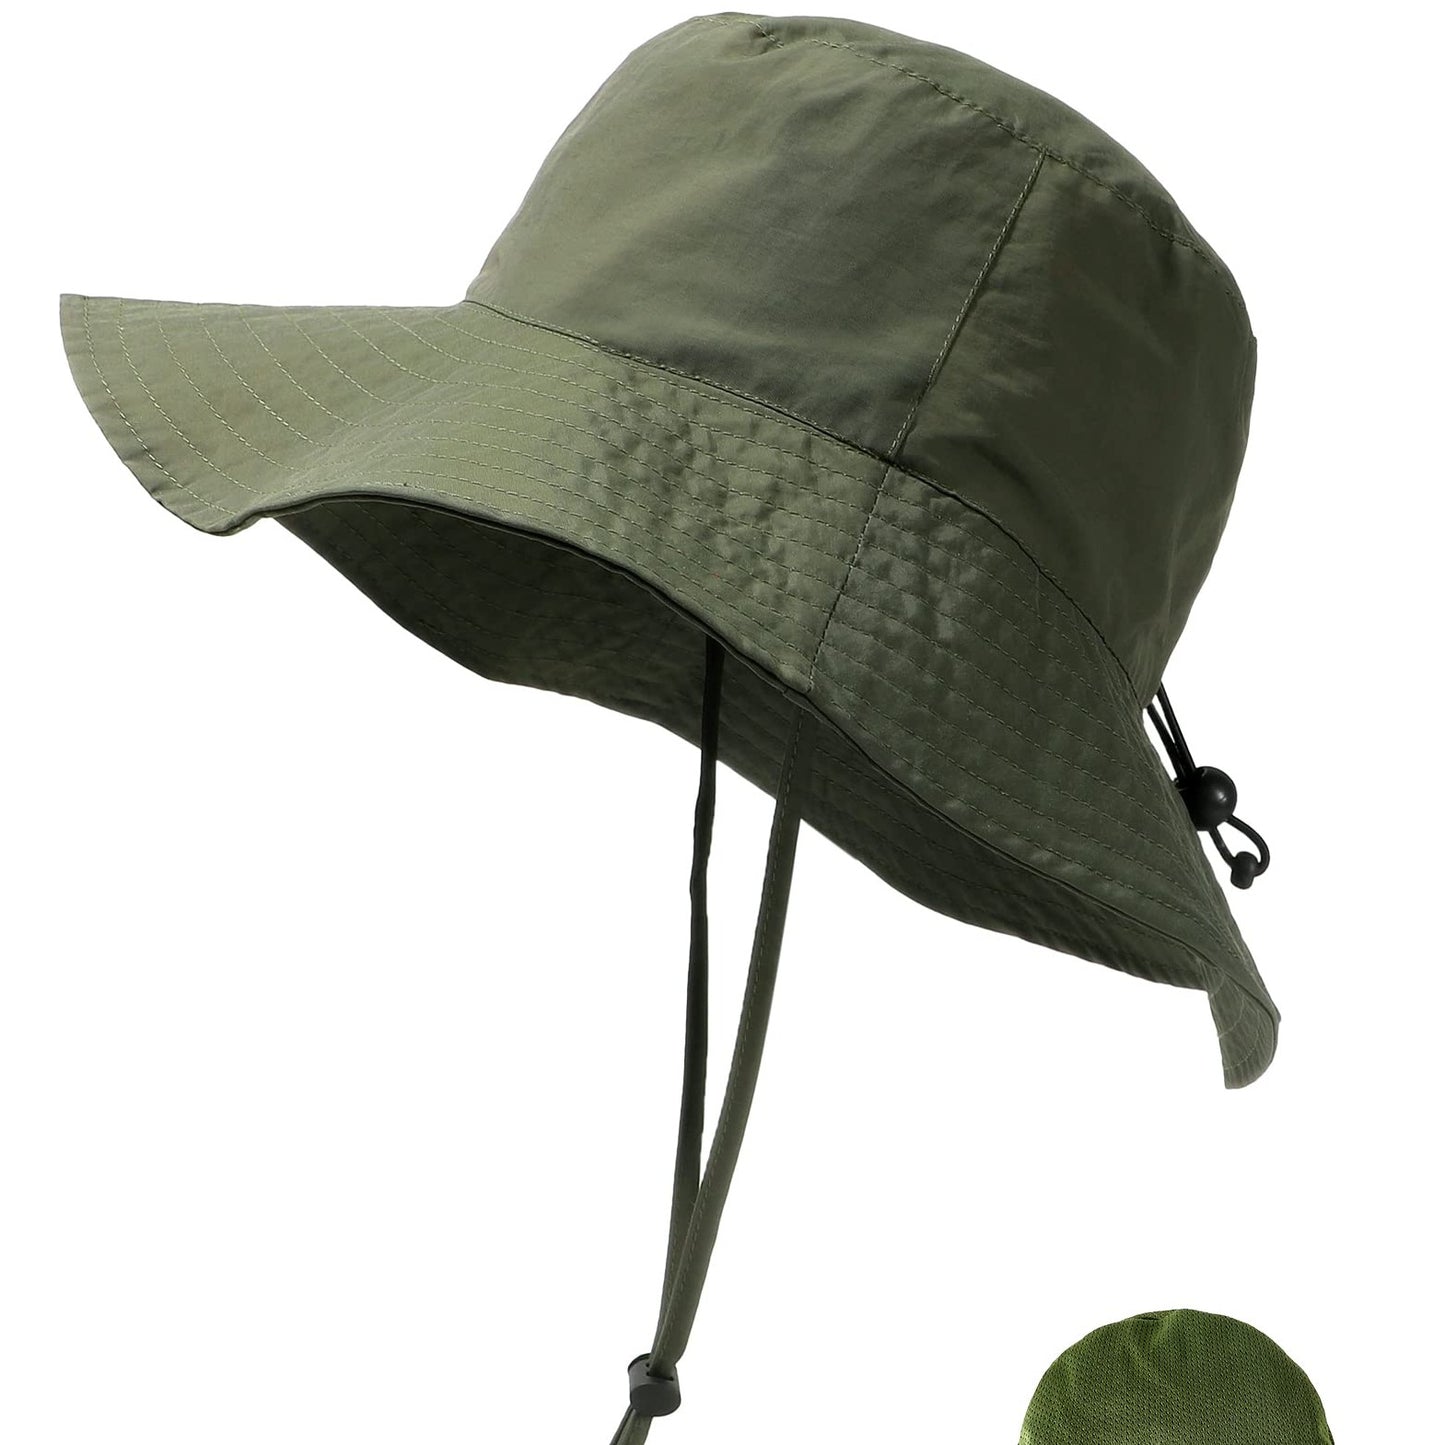 Cuoff Hats Sun Hat For Women UPF 50 UV Protection Wide Bucket Hat Cap For  Summer Fishing Hiking Camping Garden Farming Outdoor Exercise Green One